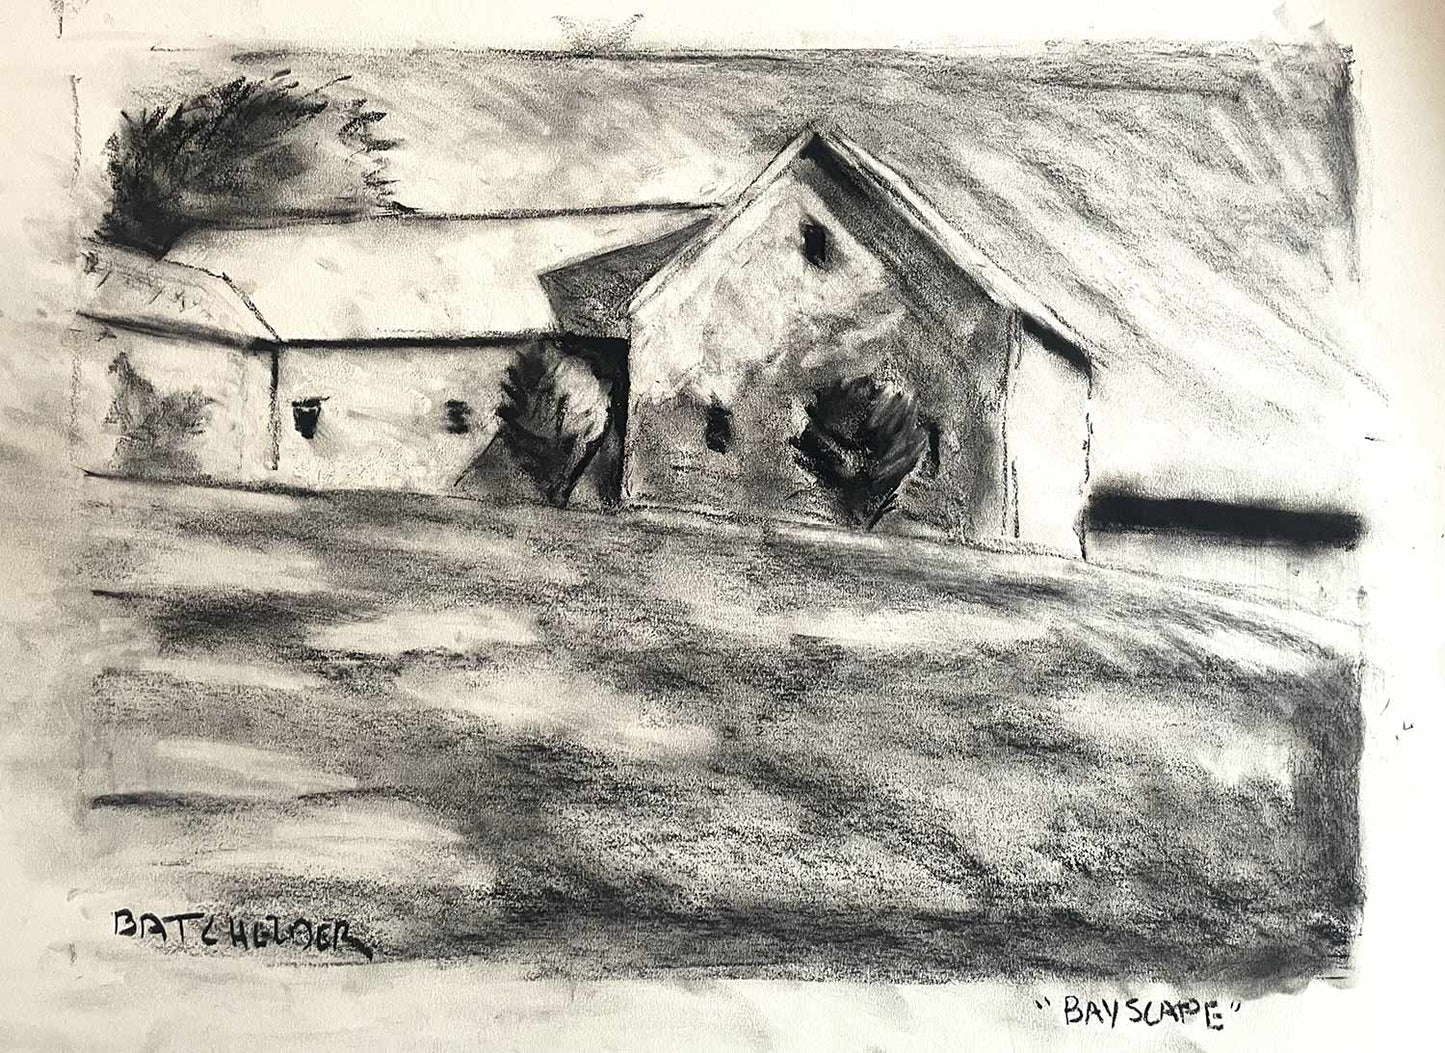 Charcoal Study for "Bayscape"